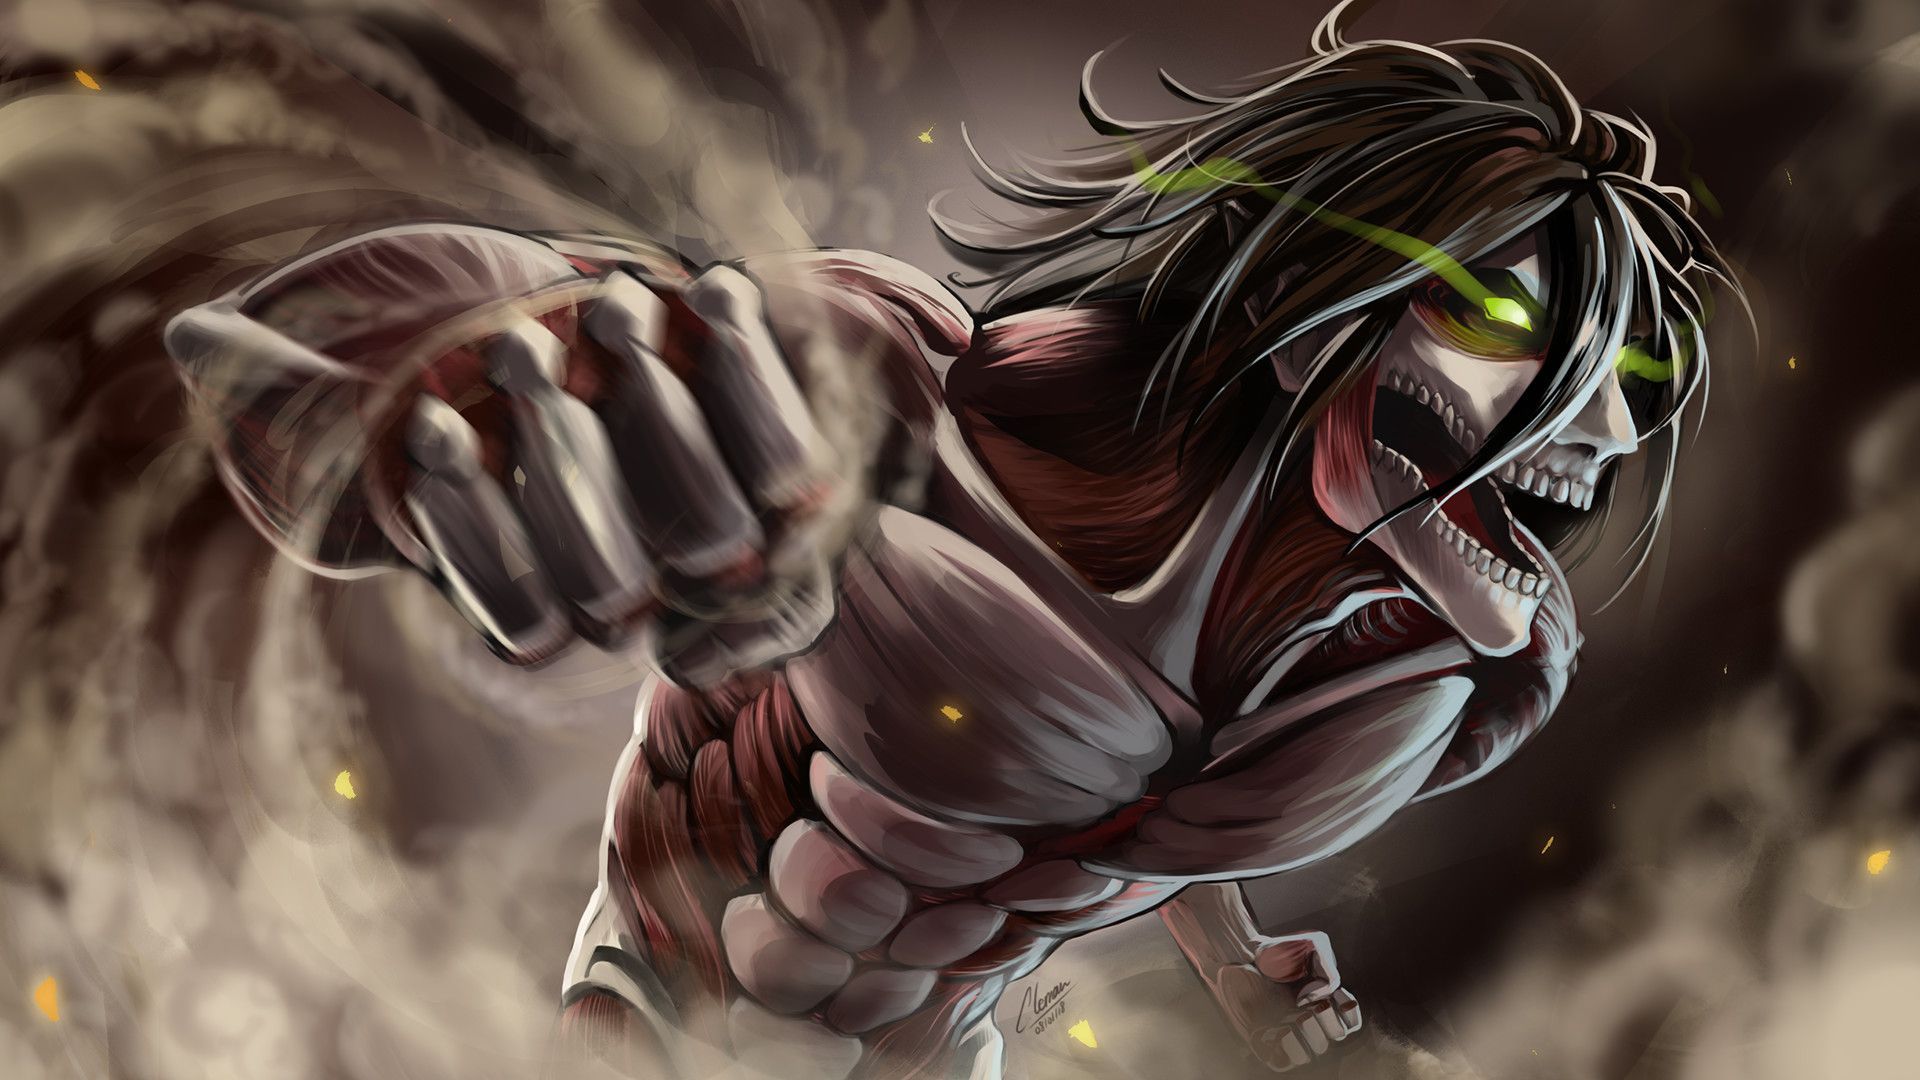 Here Are 20 Attack on Titan Wallpapers for Your Smartphone! | Dunia Games